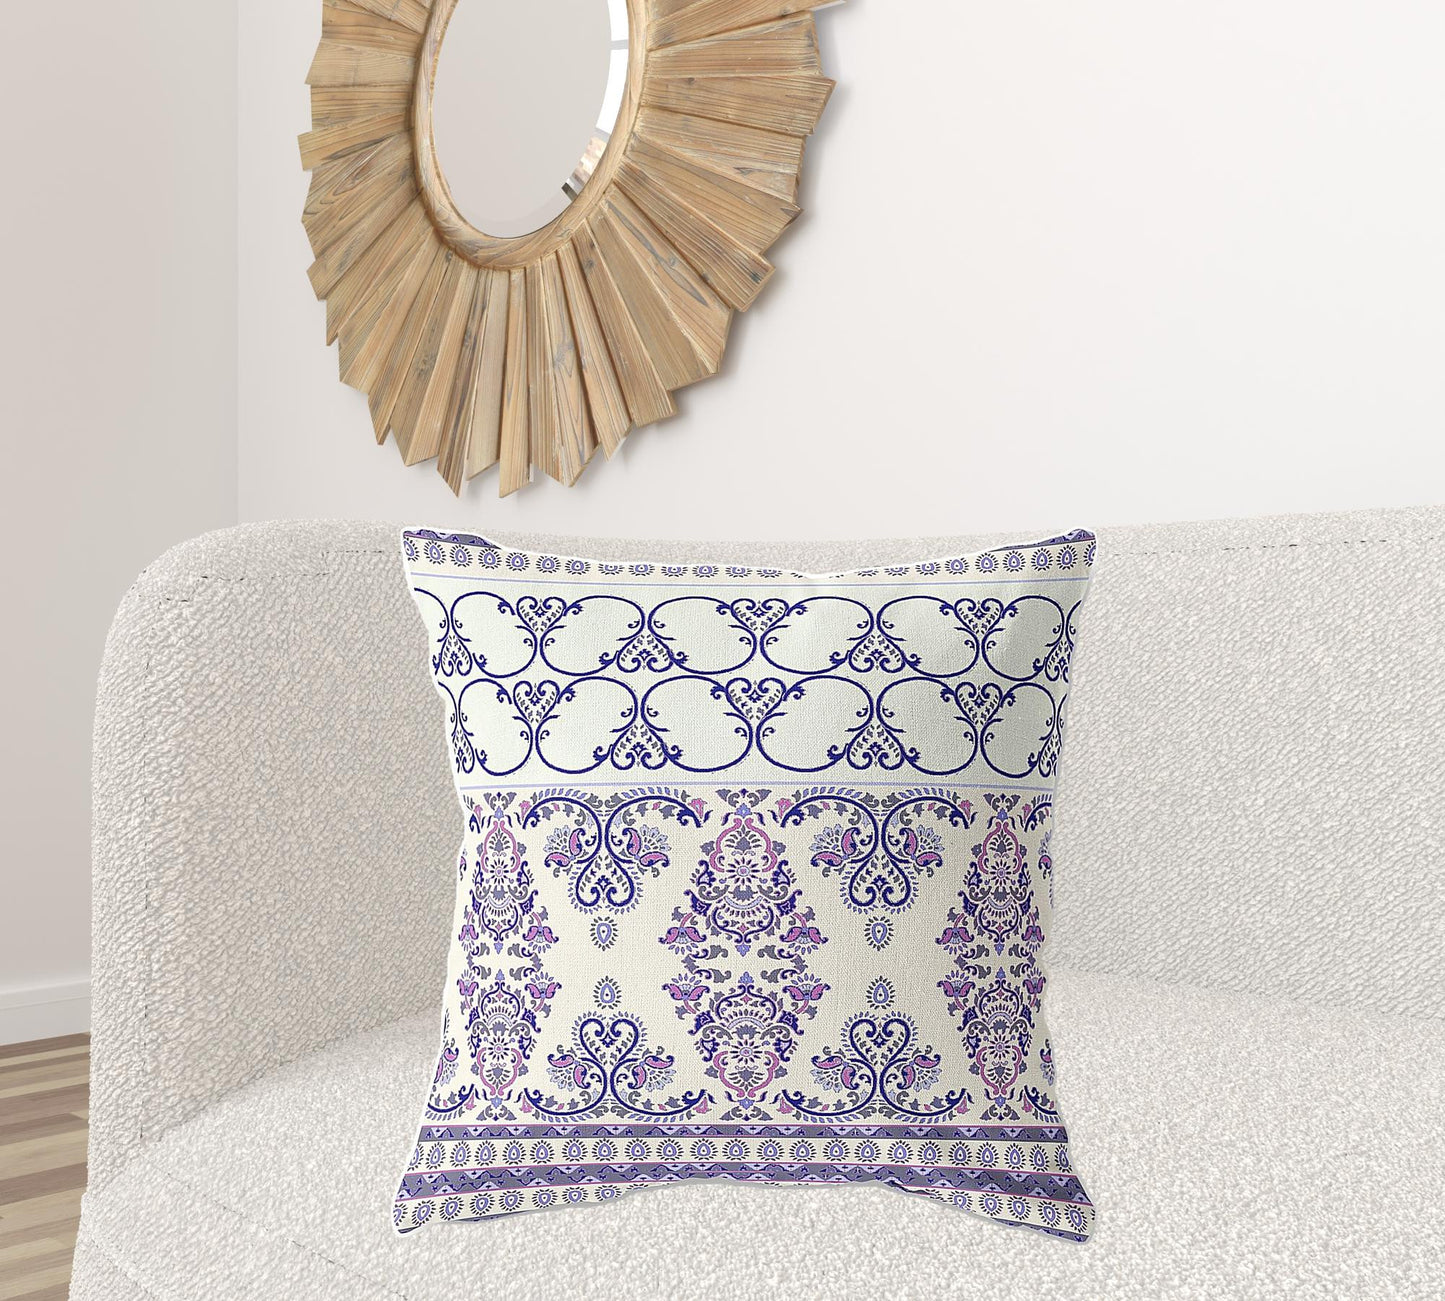 18" X 18" Off White And Navy Zippered Damask Indoor Outdoor Throw Pillow